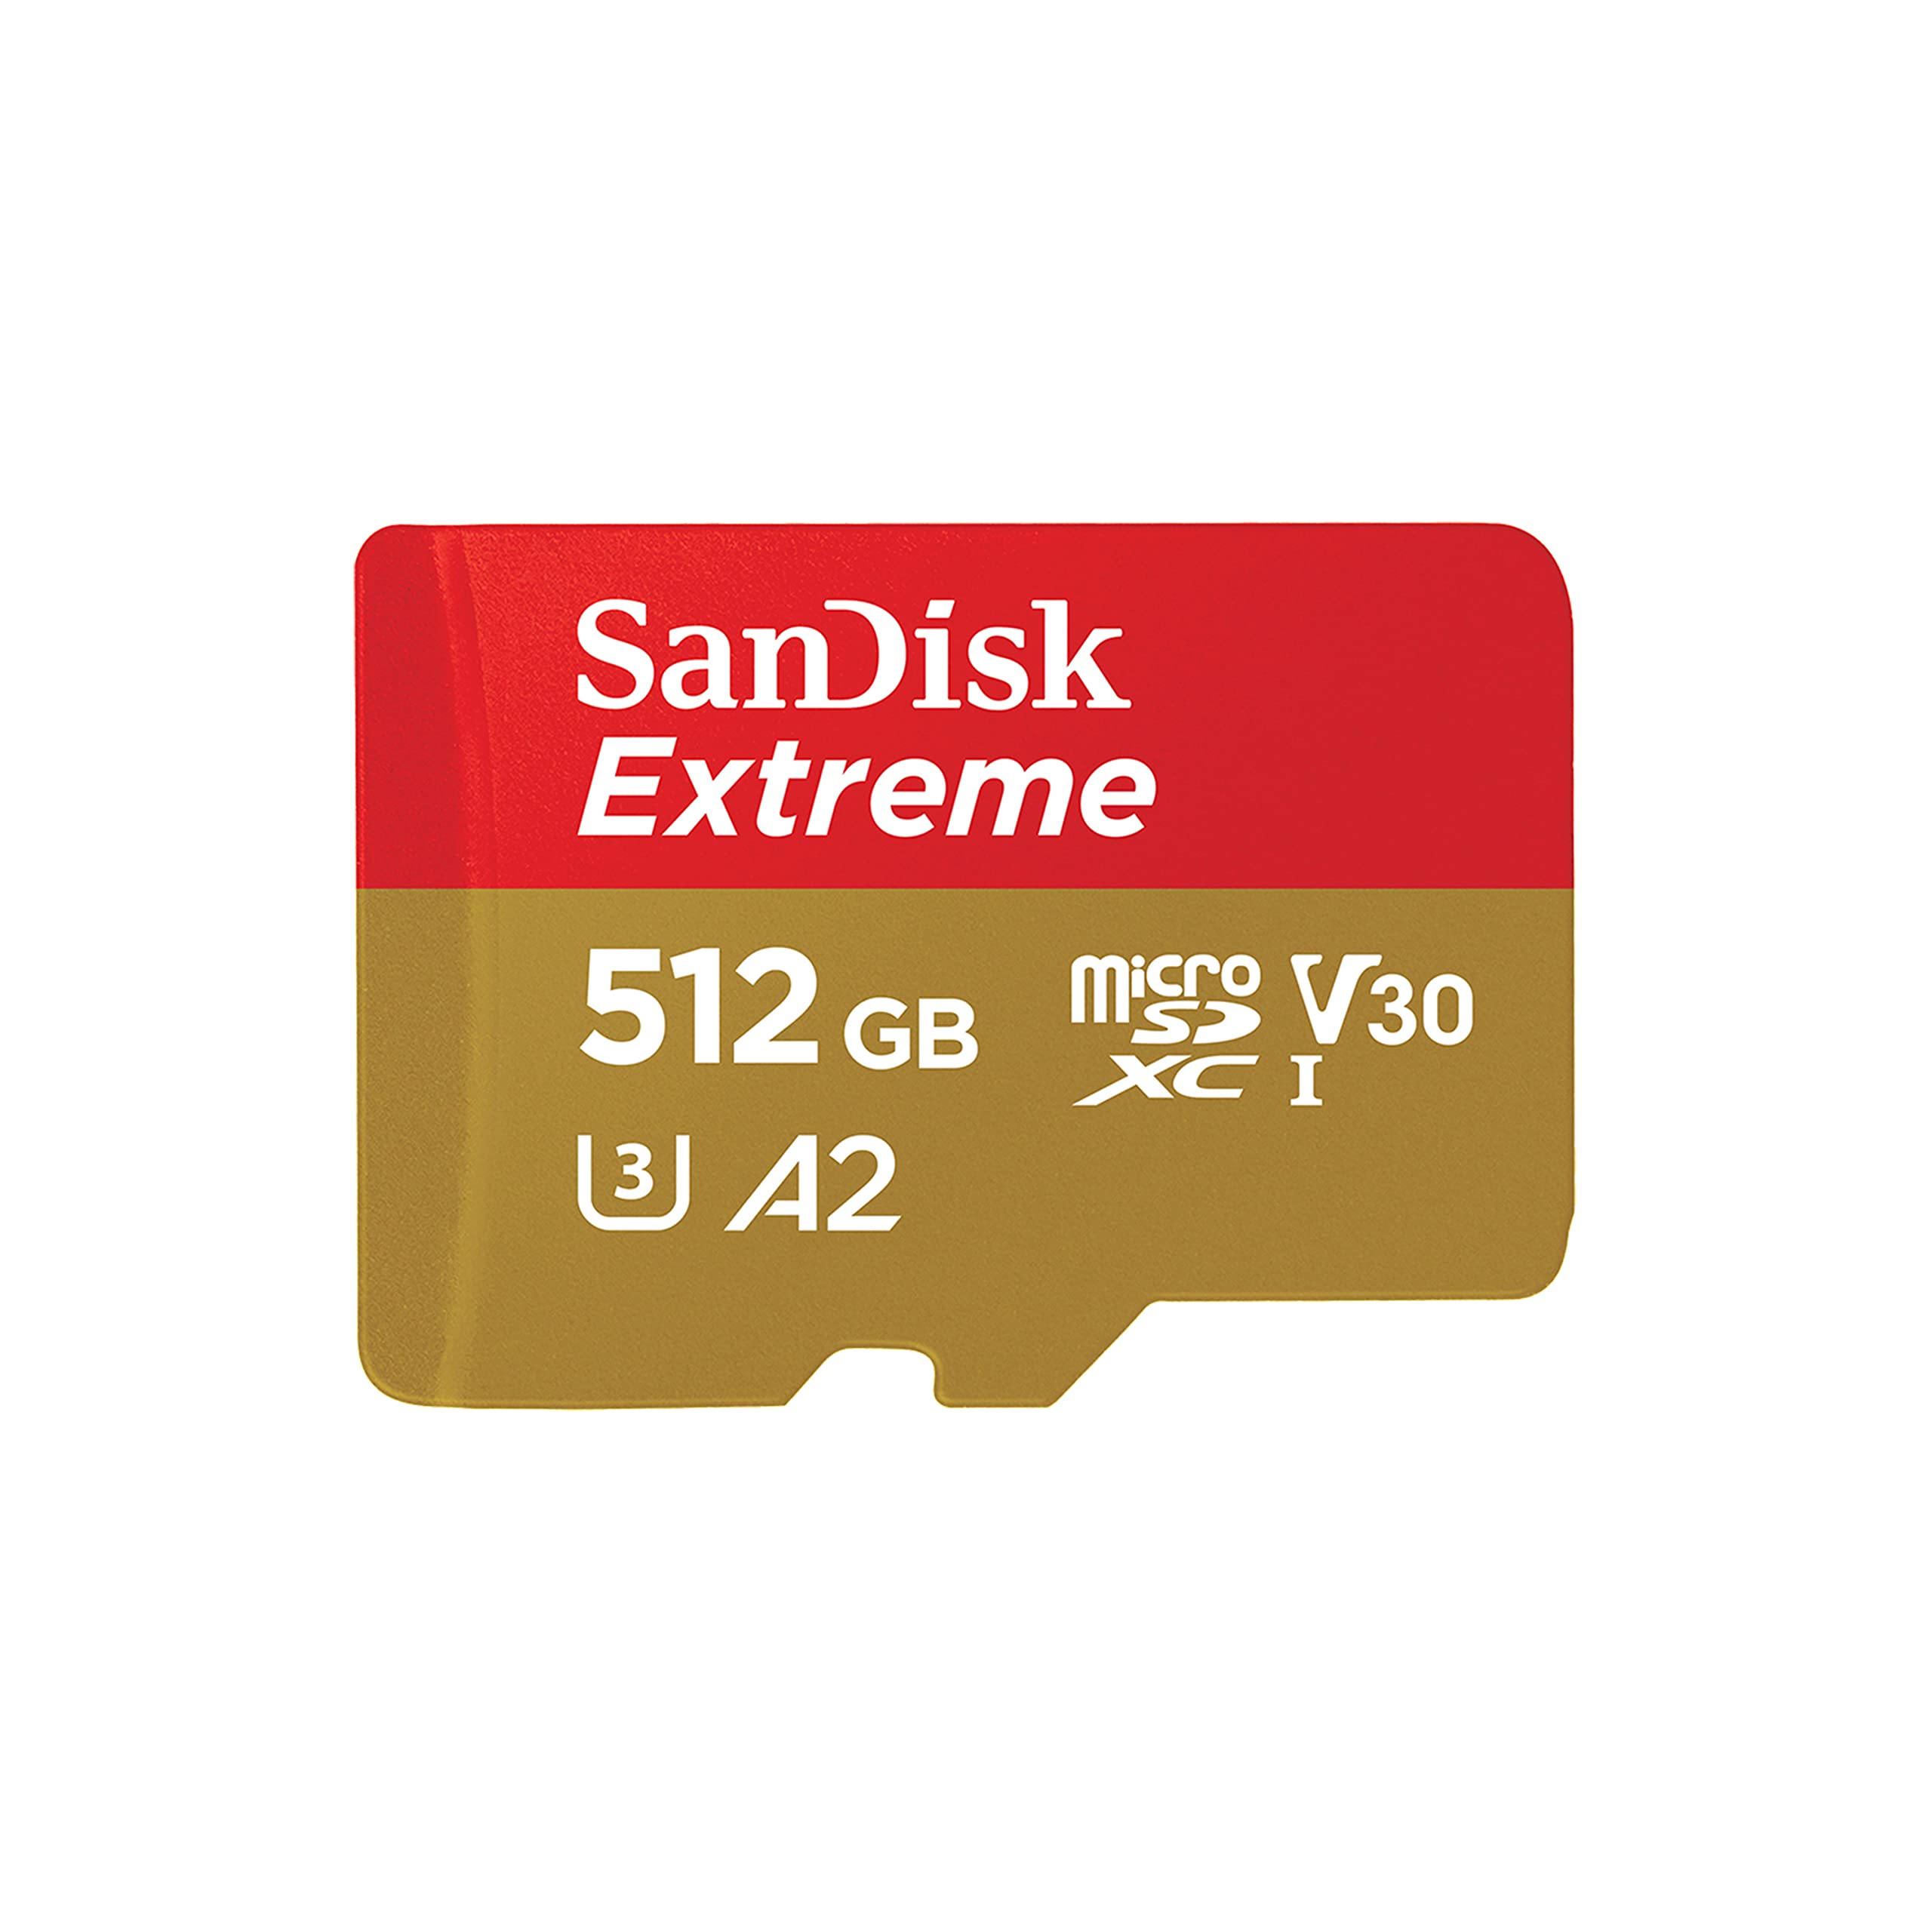 Prime Members: 512GB SanDisk Extreme microSDXC UHS-I Memory Card w/ Adapter $40 + Free Shipping